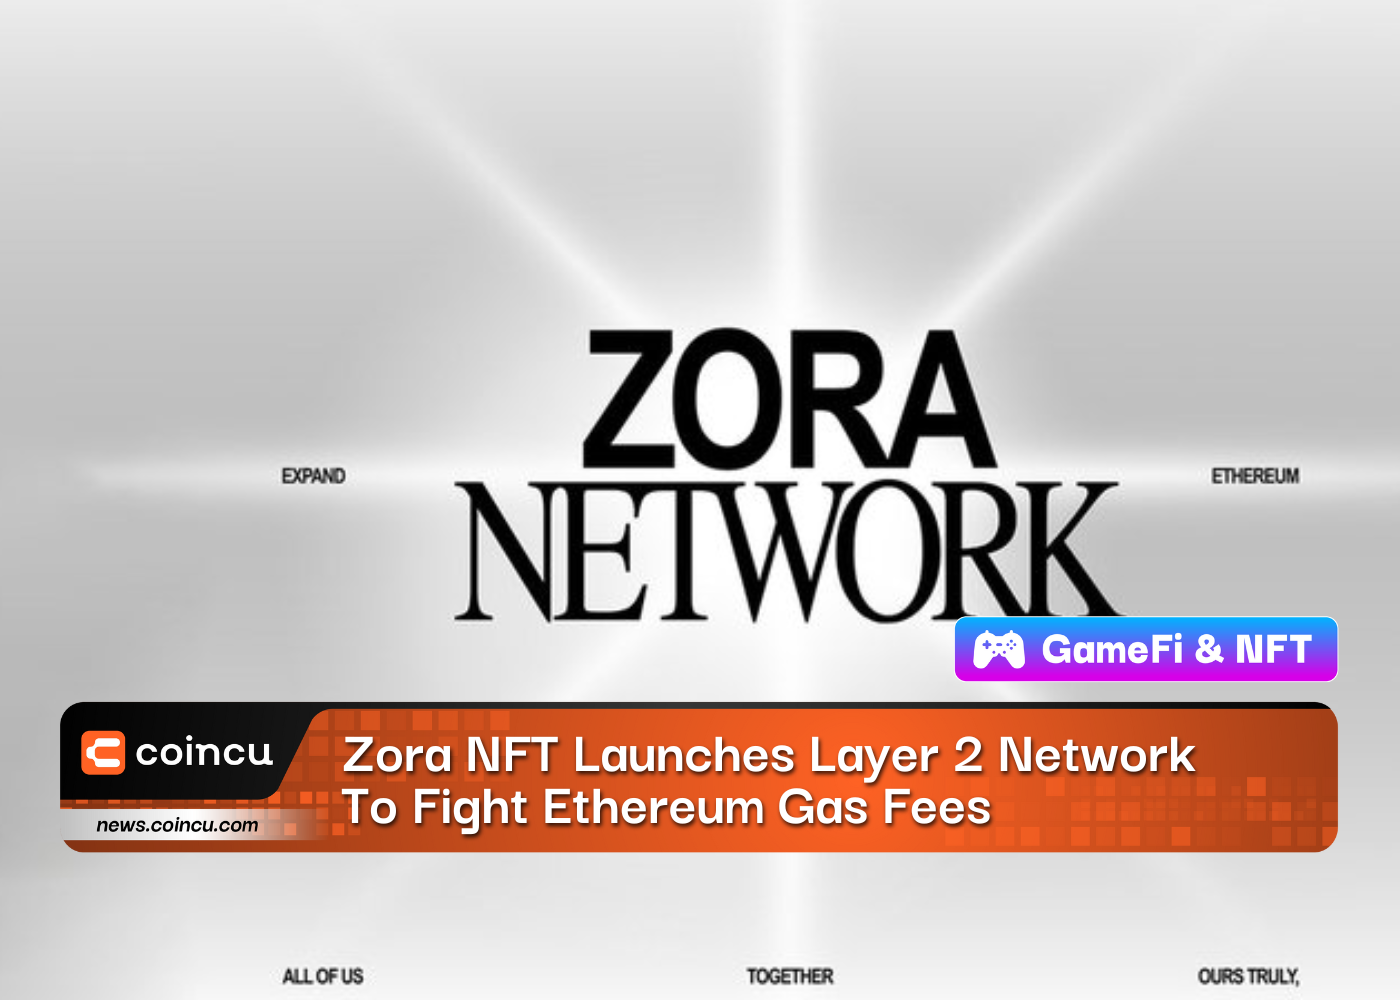 Zora NFT Launches Layer 2 Network To Fight Ethereum Gas Fees